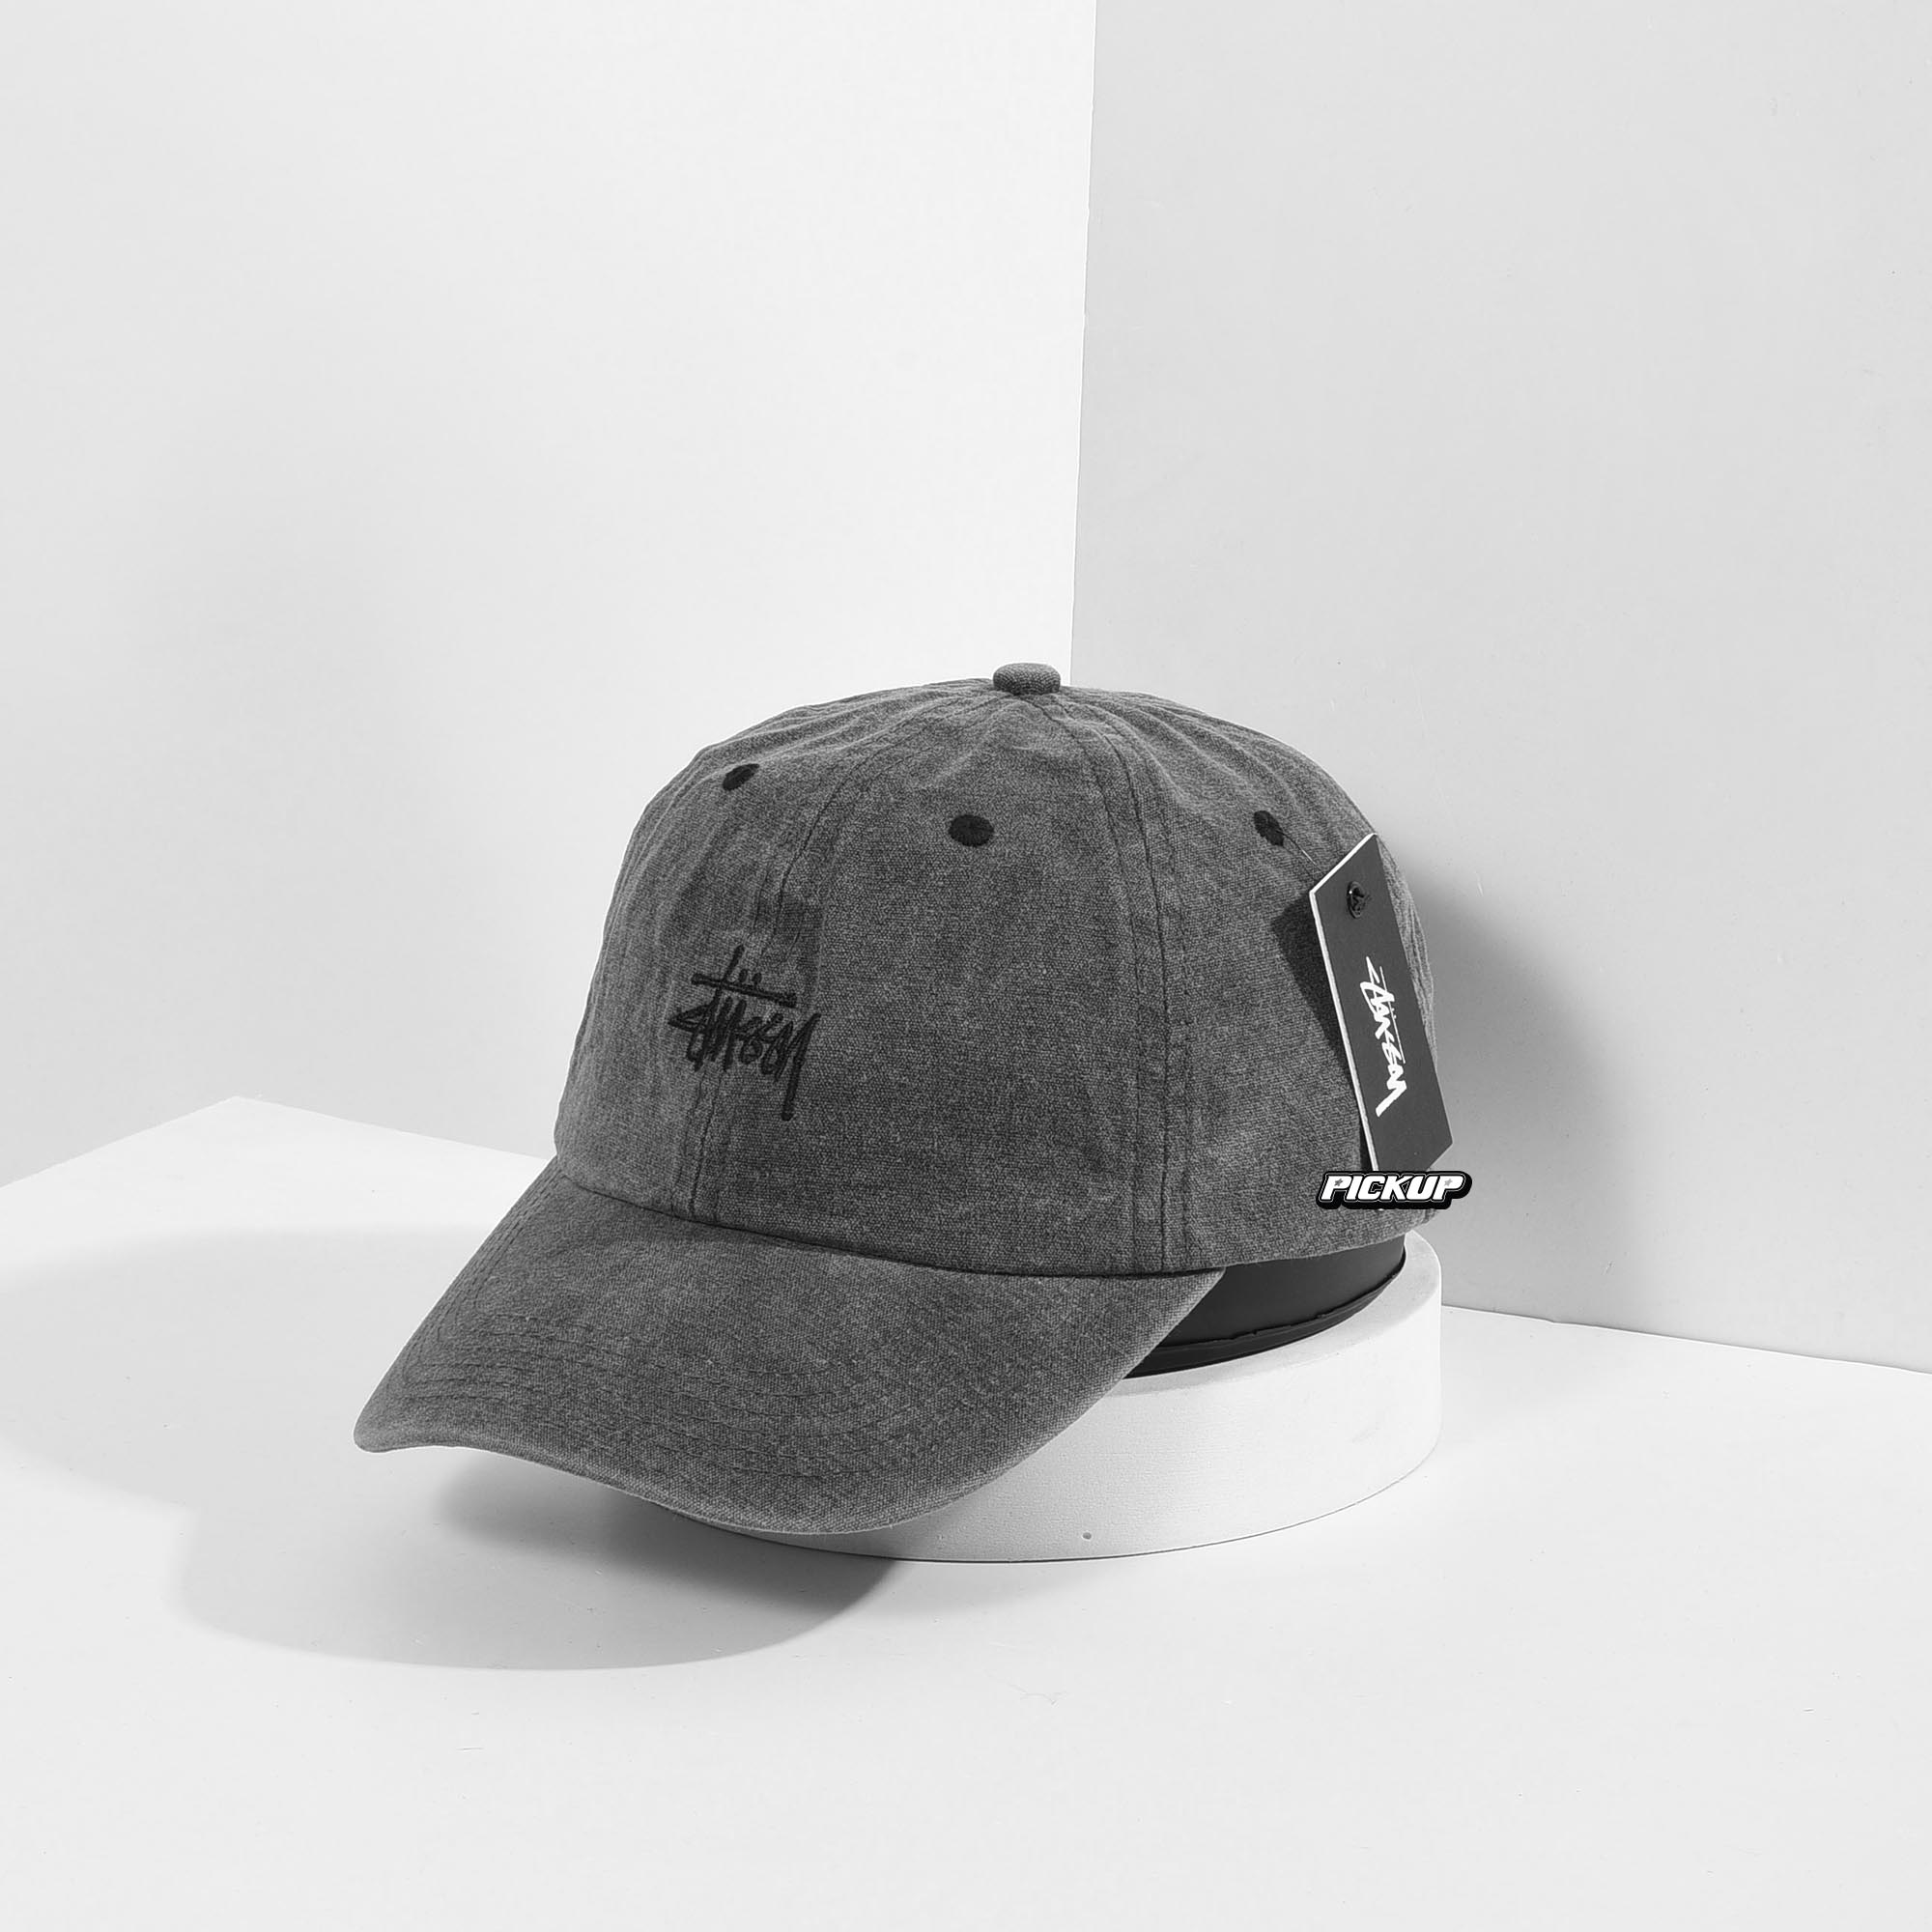 Stussy smooth stock enzyme cap